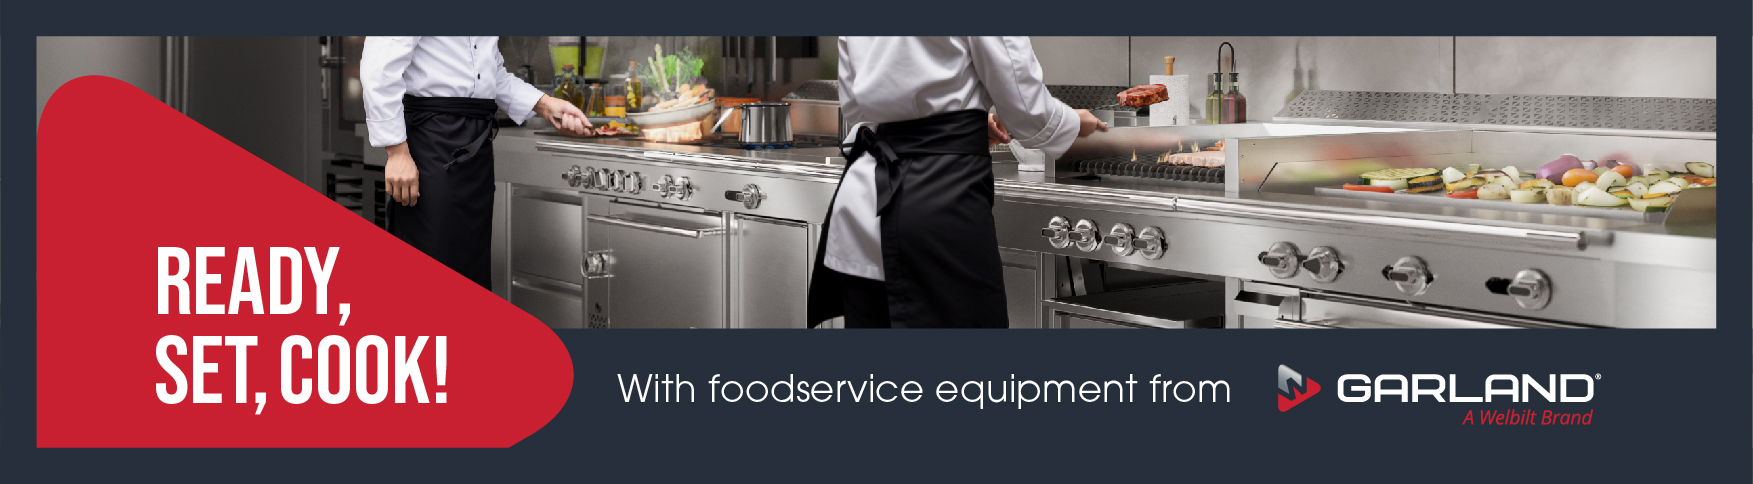 Garland brings functionality to any chef's kitchen!